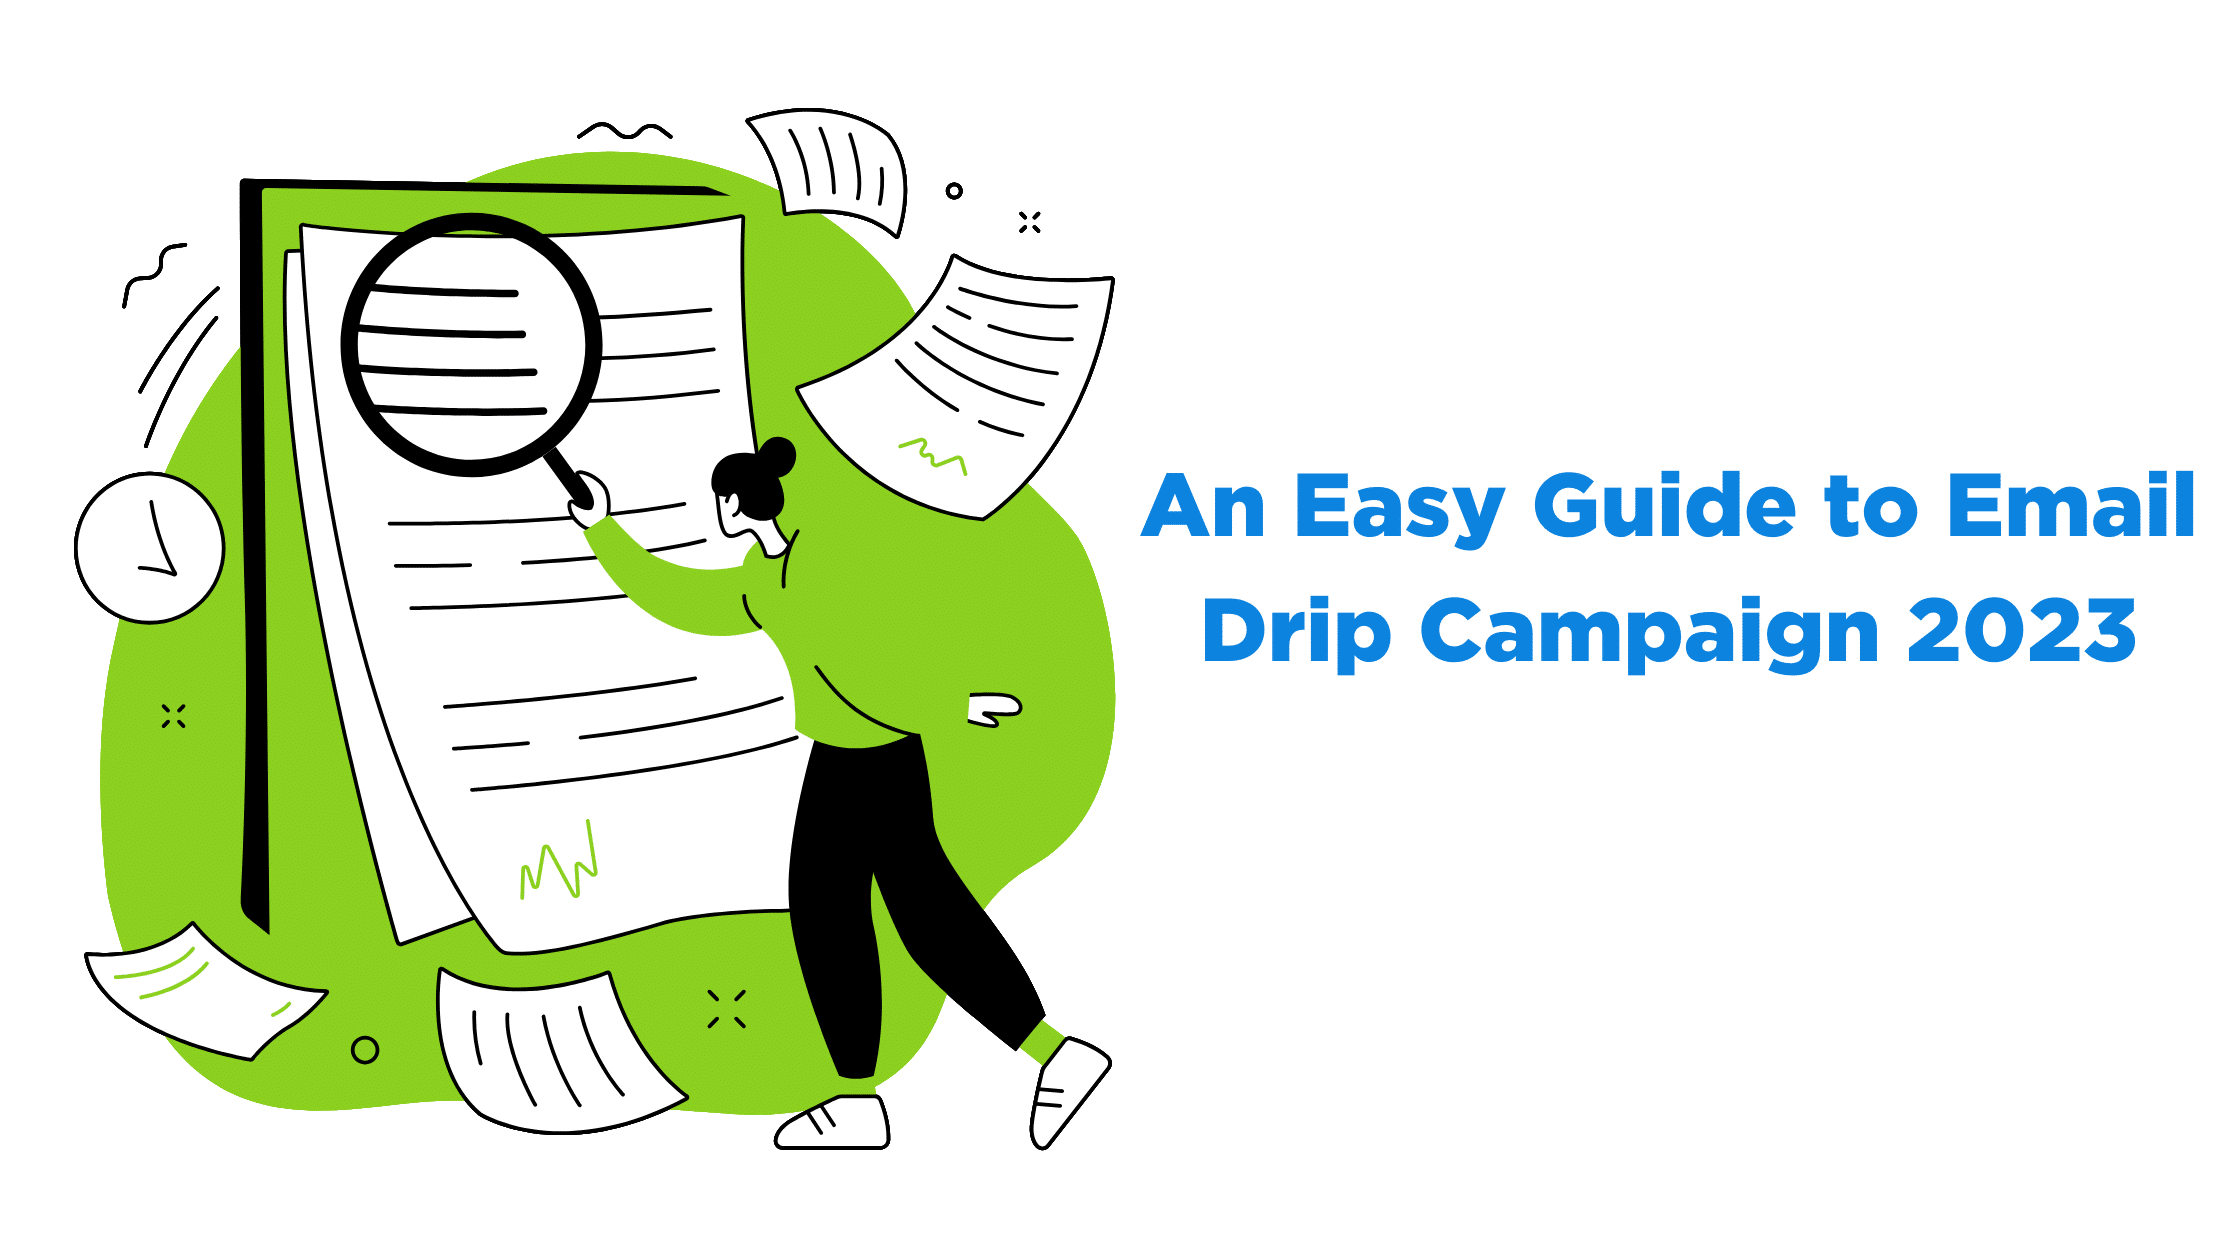 An Easy Guide to Email Drip Campaign